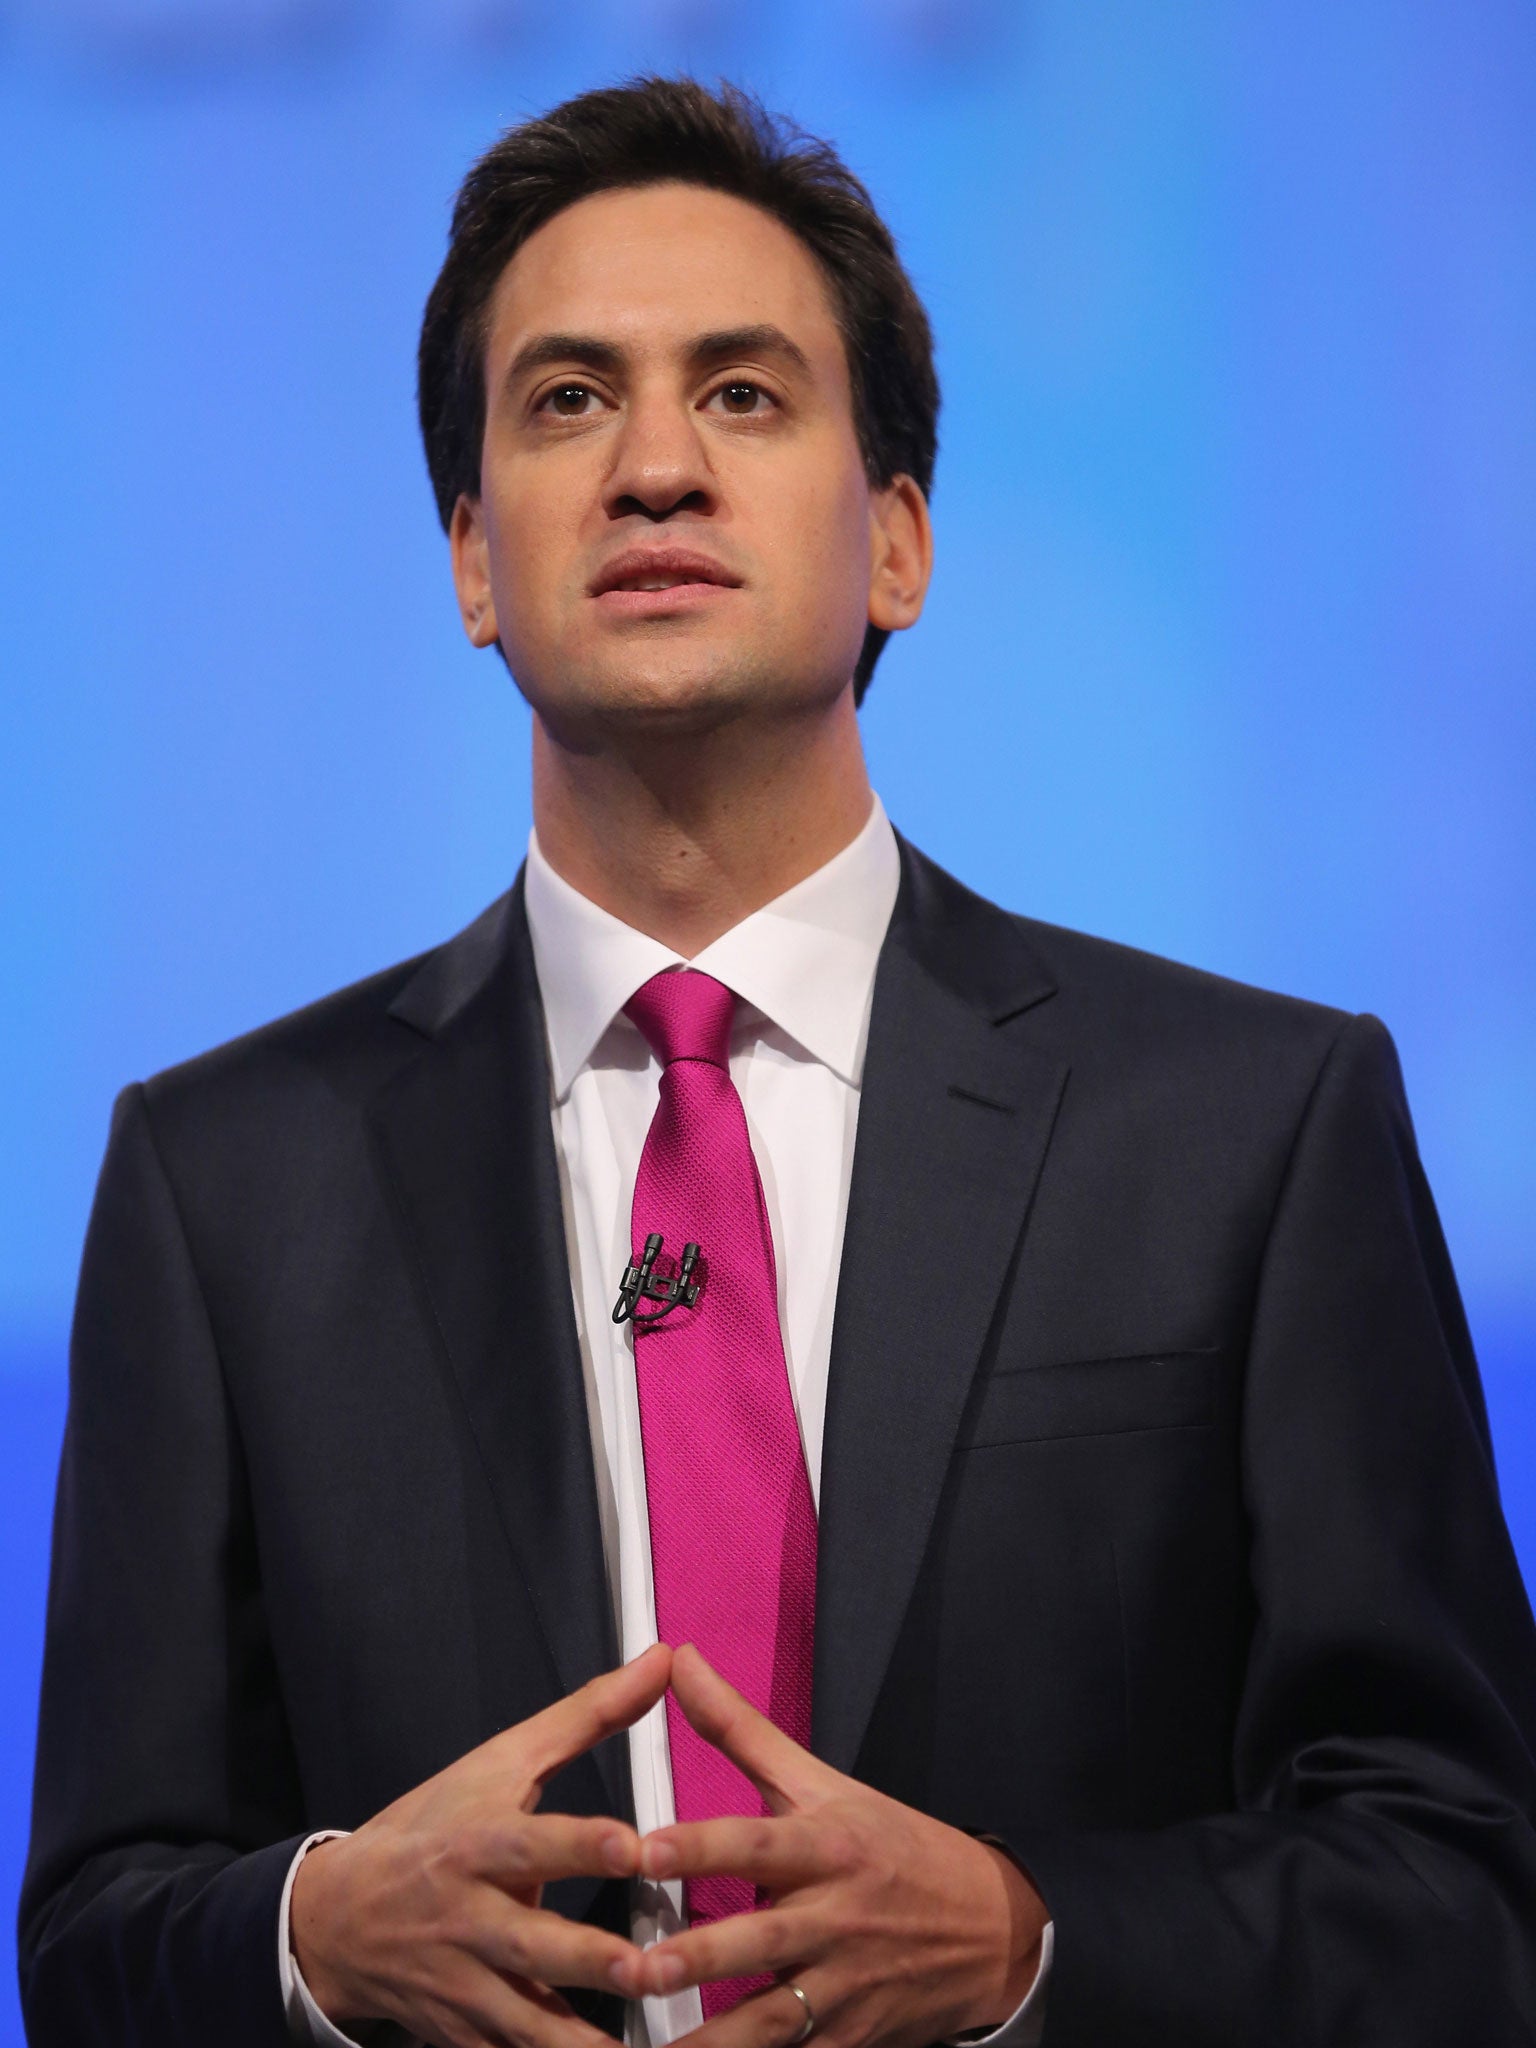 One reason Ed Miliband defeated his brother for Labour leadership was his revelation during the campaign that he had opposed the Iraq War at the time